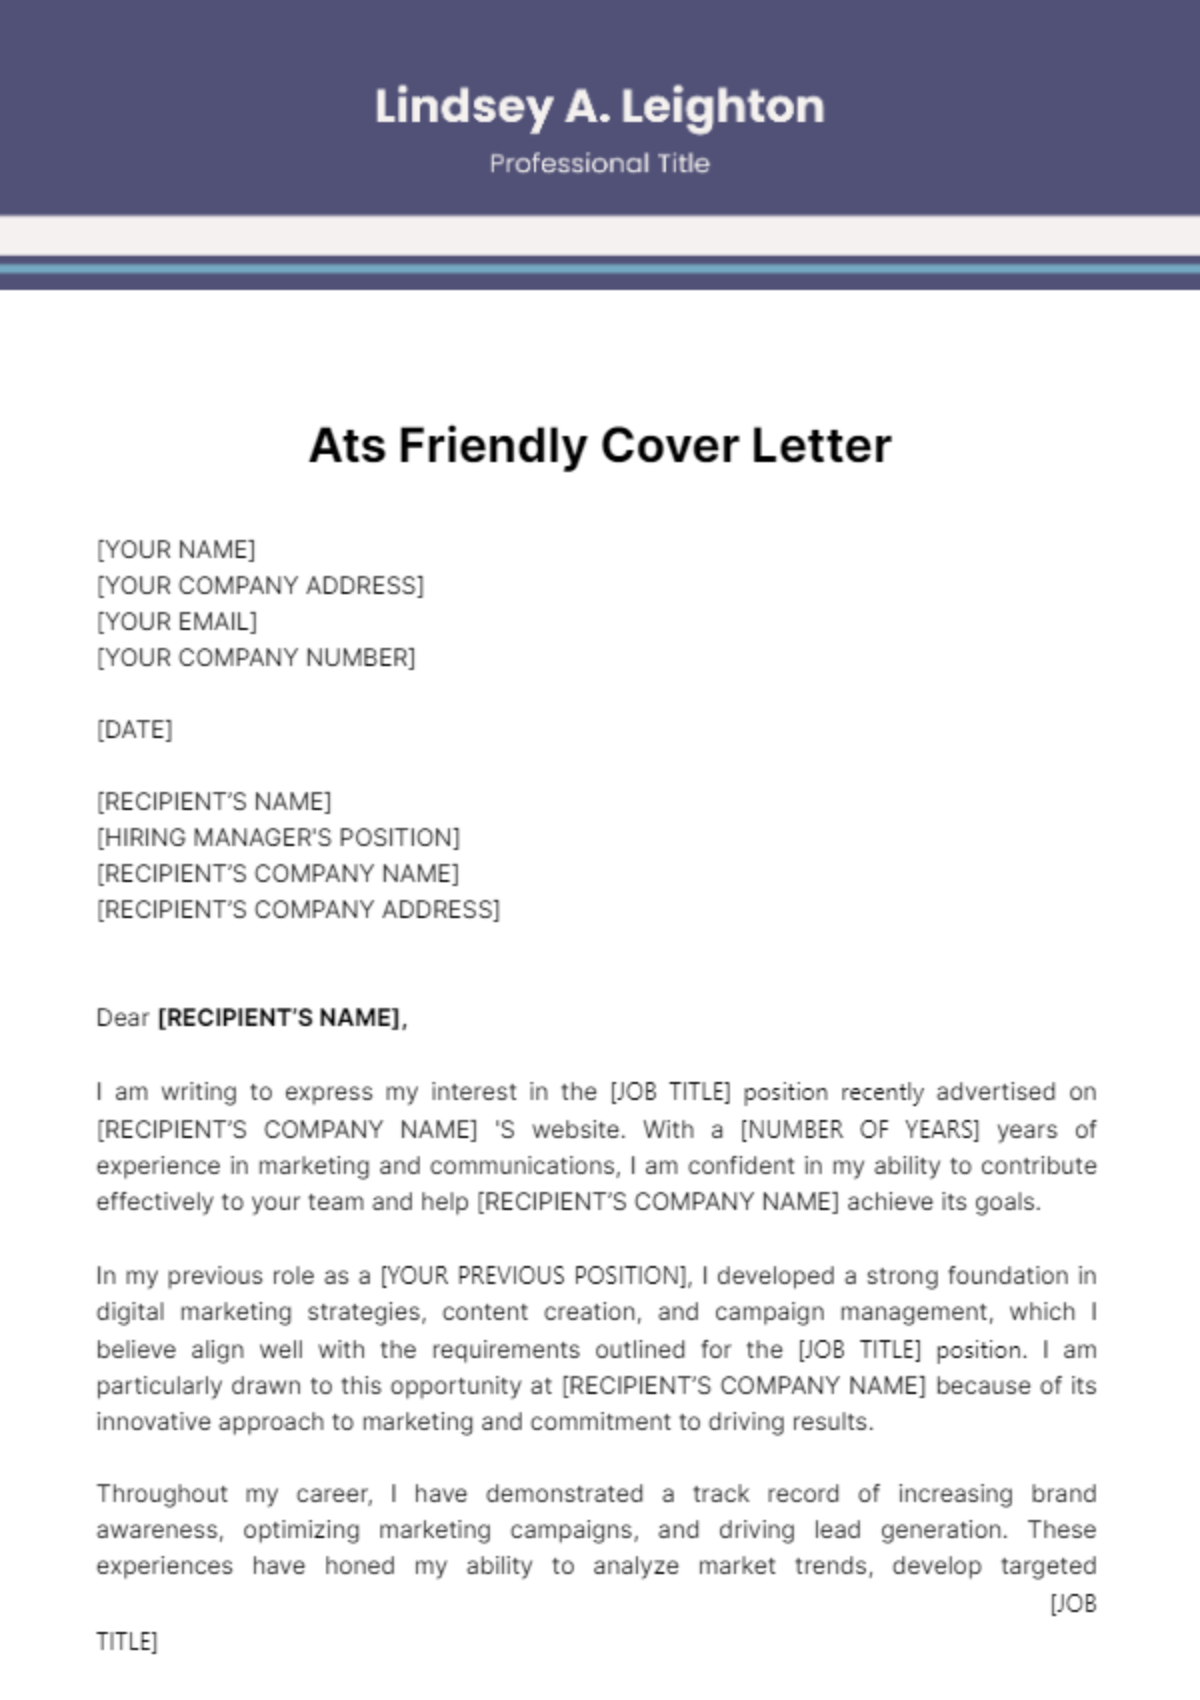 Ats Friendly Cover Letter Template